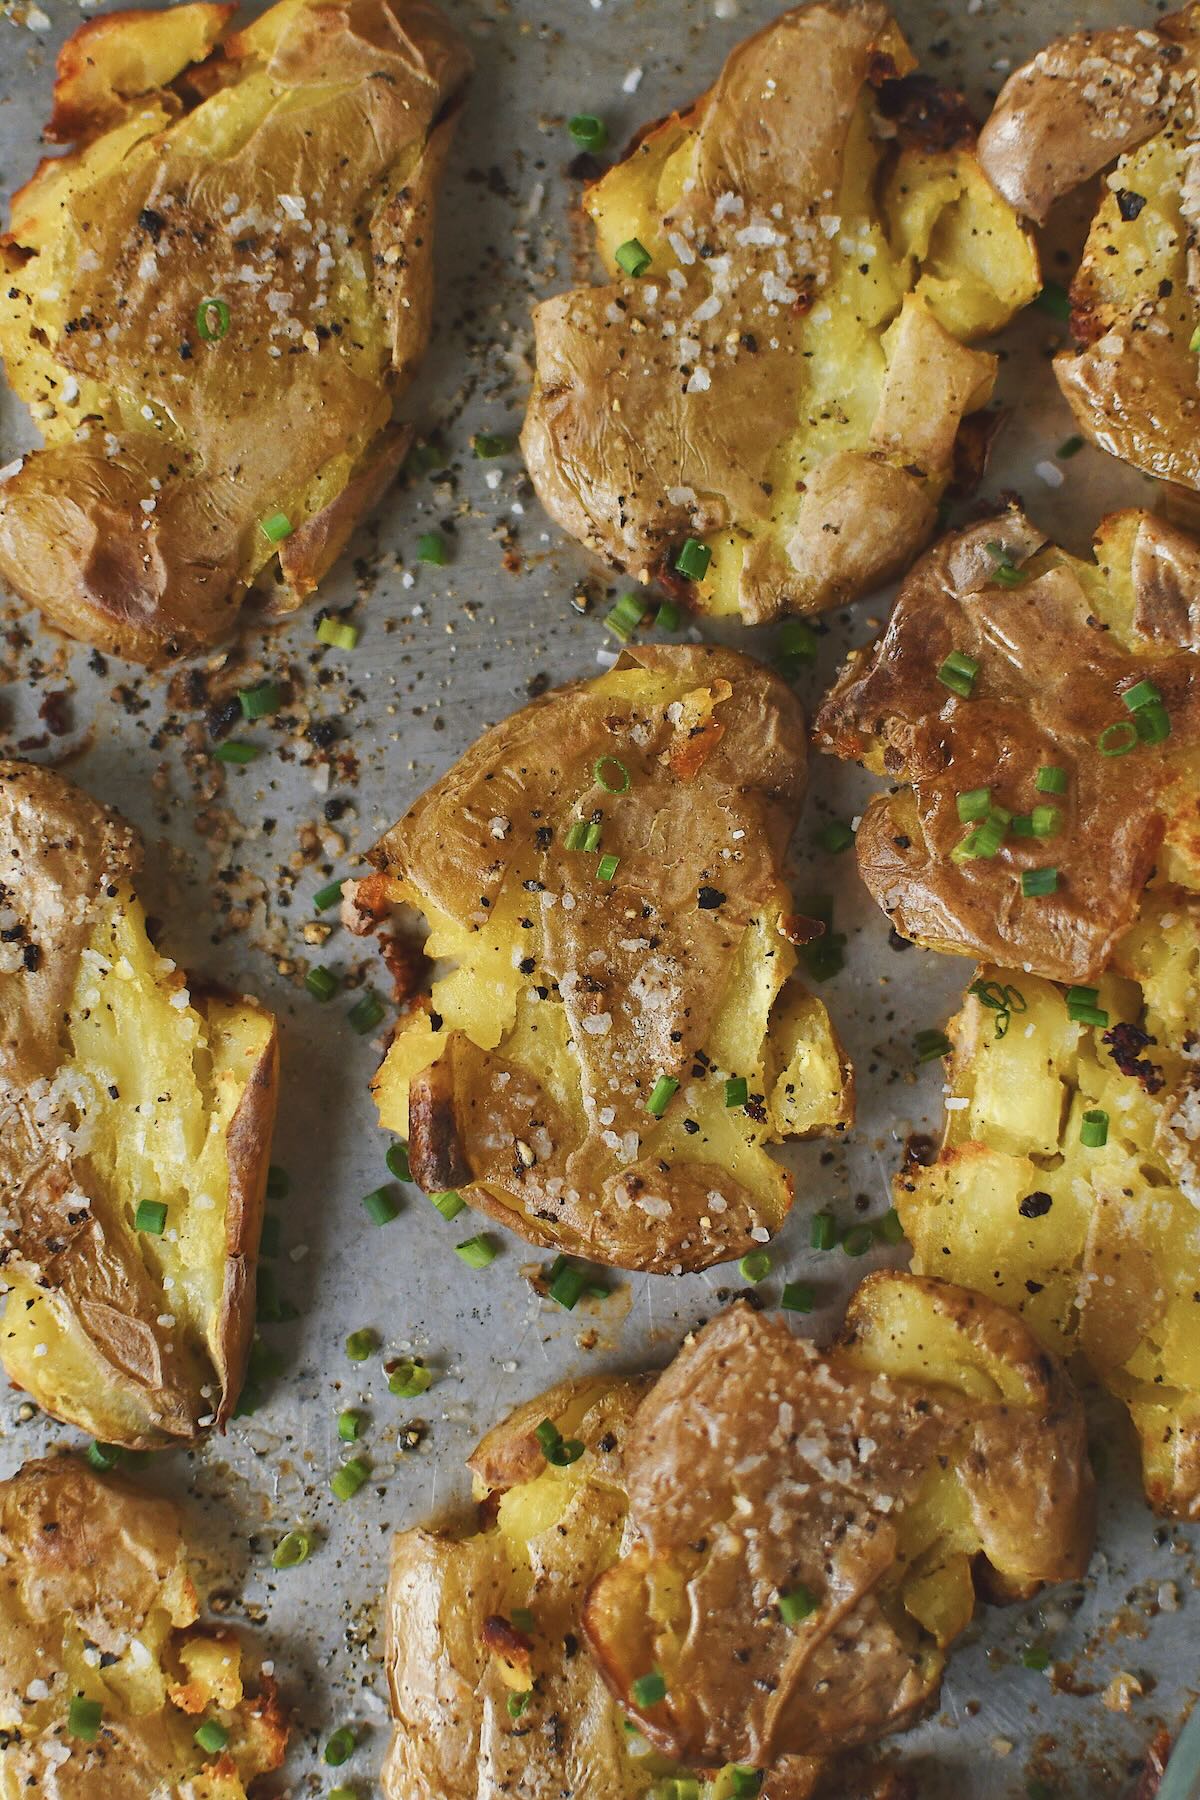 Crispy Smashed Potatoes just out of the oven ready to be enjoyed.